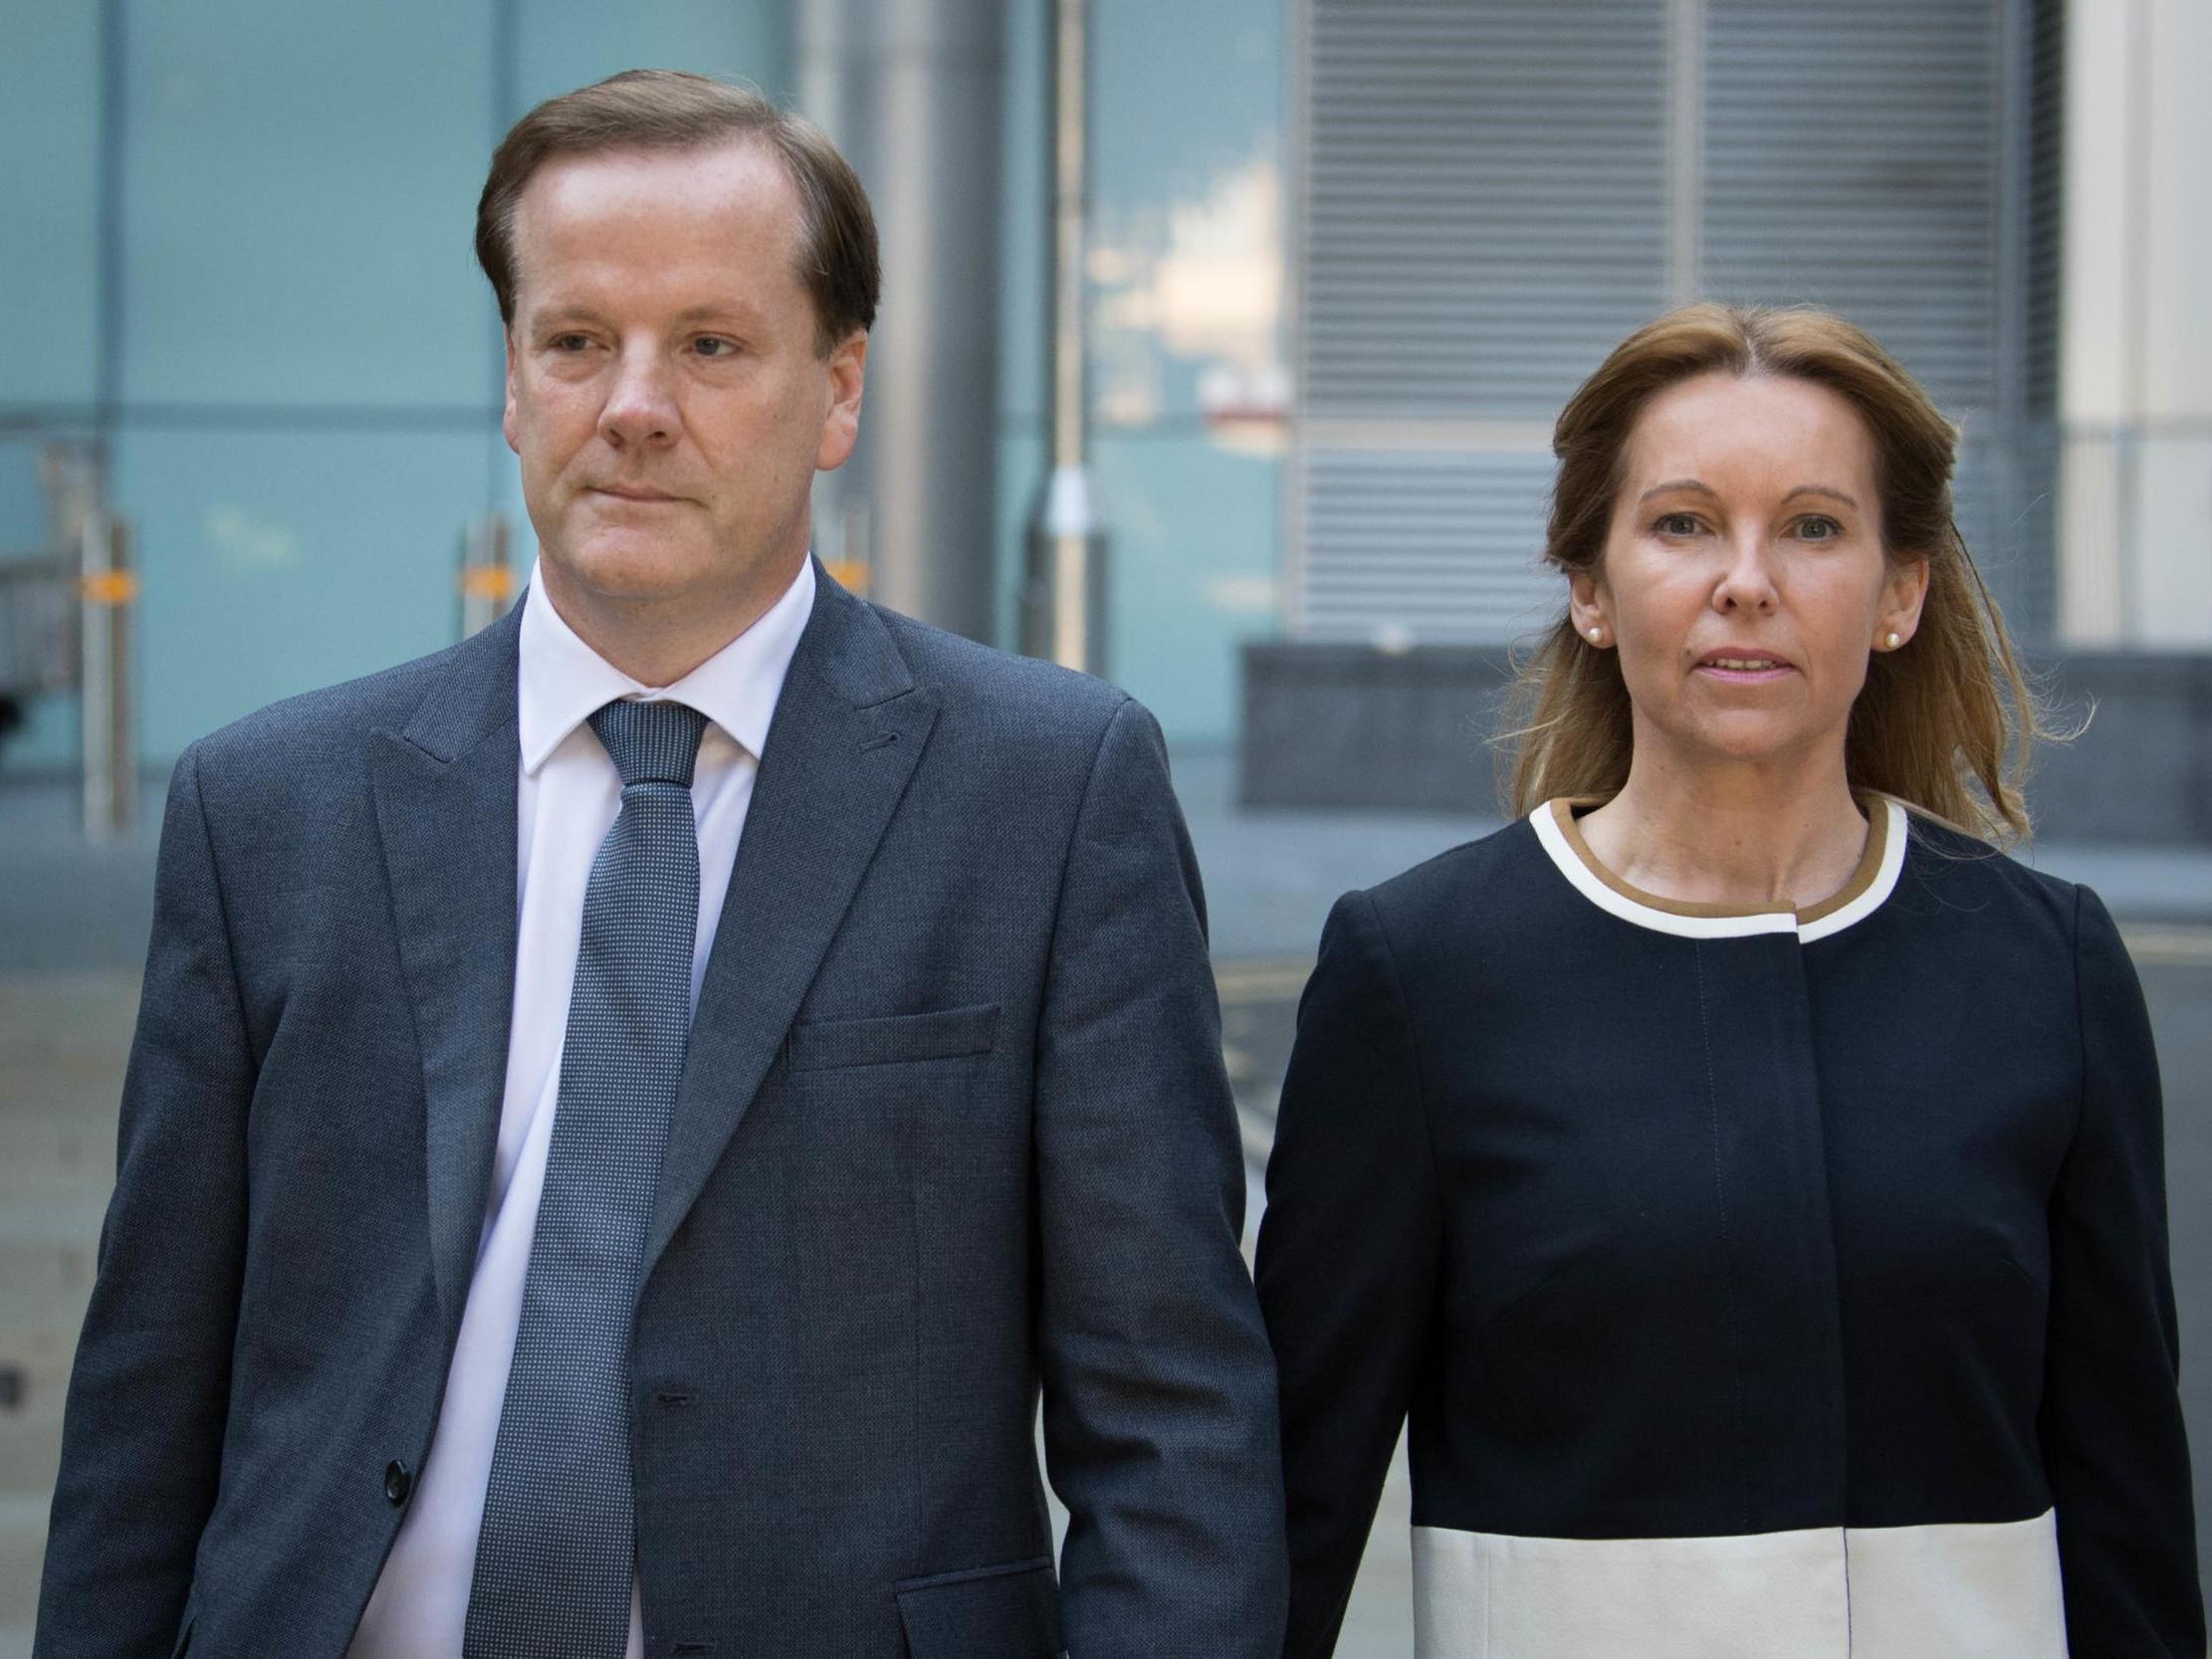 Charlie Elphicke arriving at Southwark Crown Court in London with his wife Natalie Elphicke